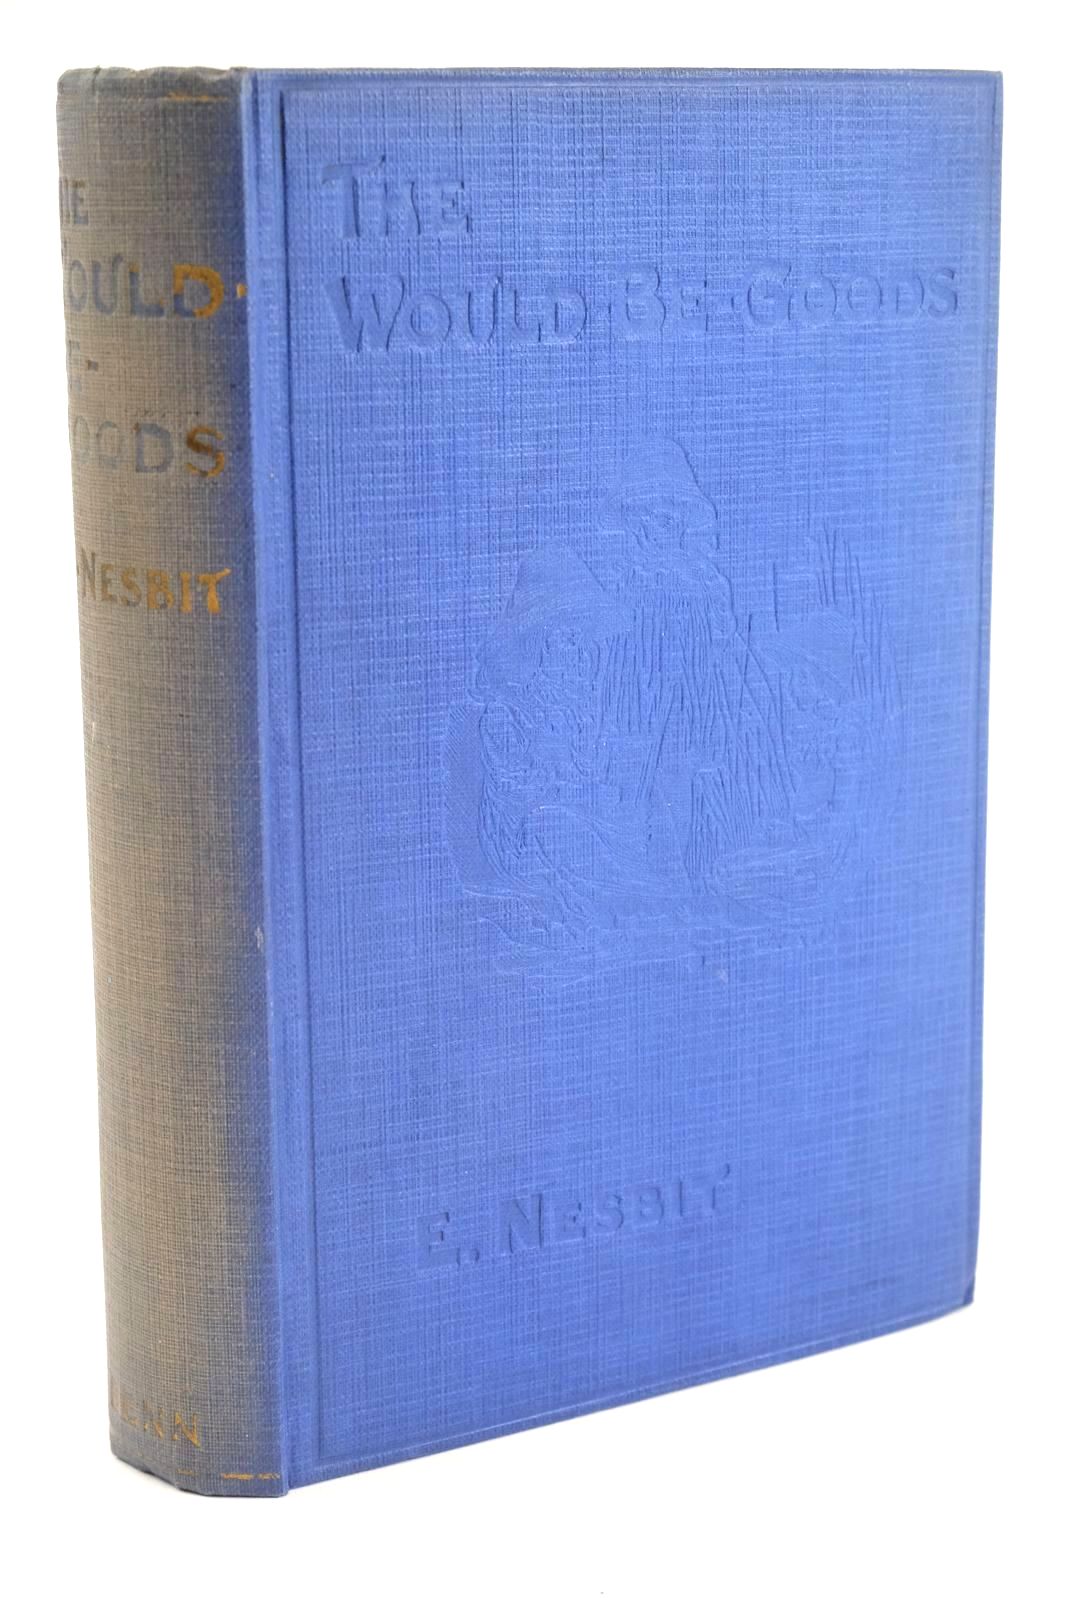 Photo of THE WOULDBEGOODS written by Nesbit, E. illustrated by Blampied, Edmund et al.,  published by Ernest Benn Limited (STOCK CODE: 1324603)  for sale by Stella & Rose's Books